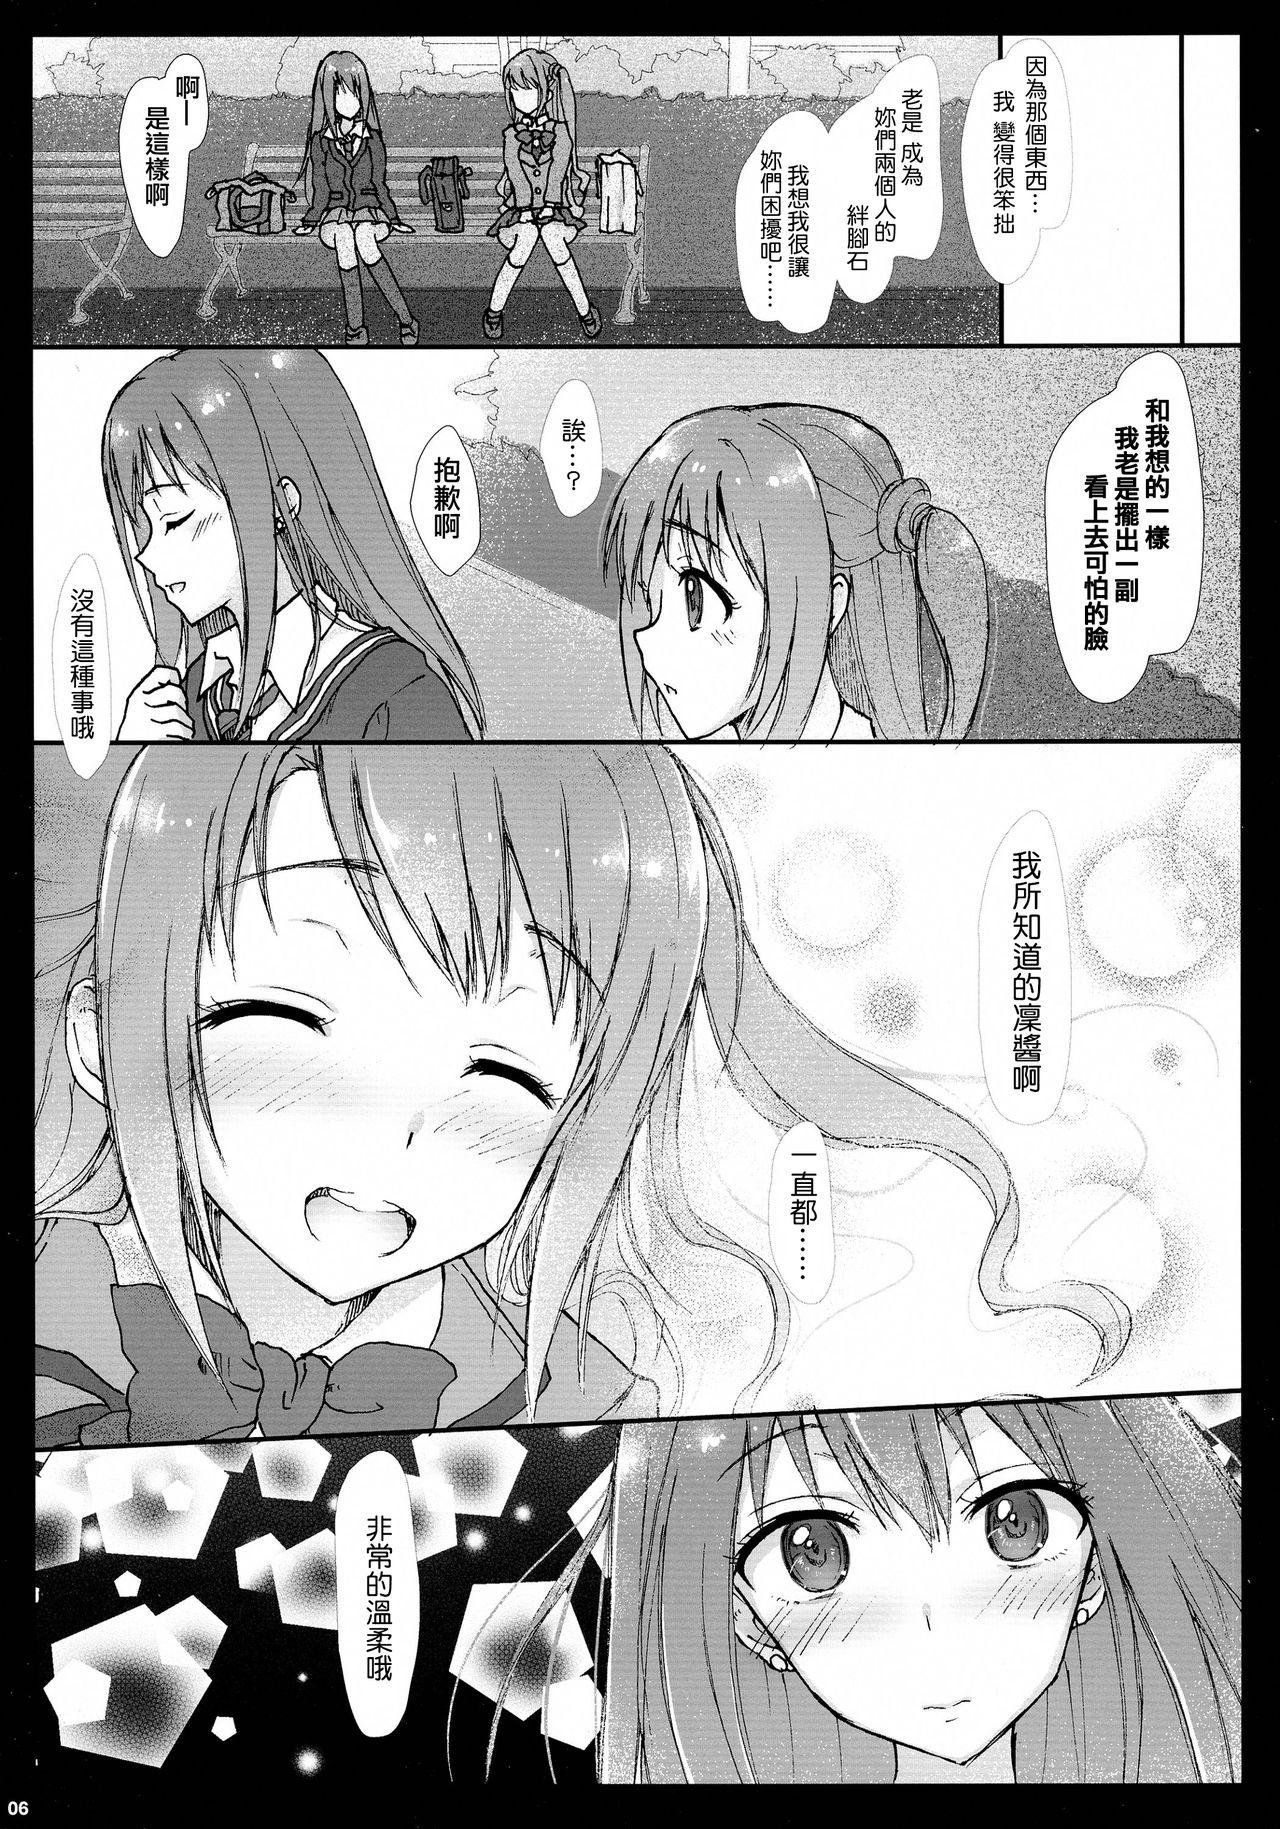 Staxxx AND THEY LIVED happily ever after... 002 - The idolmaster Submission - Page 6